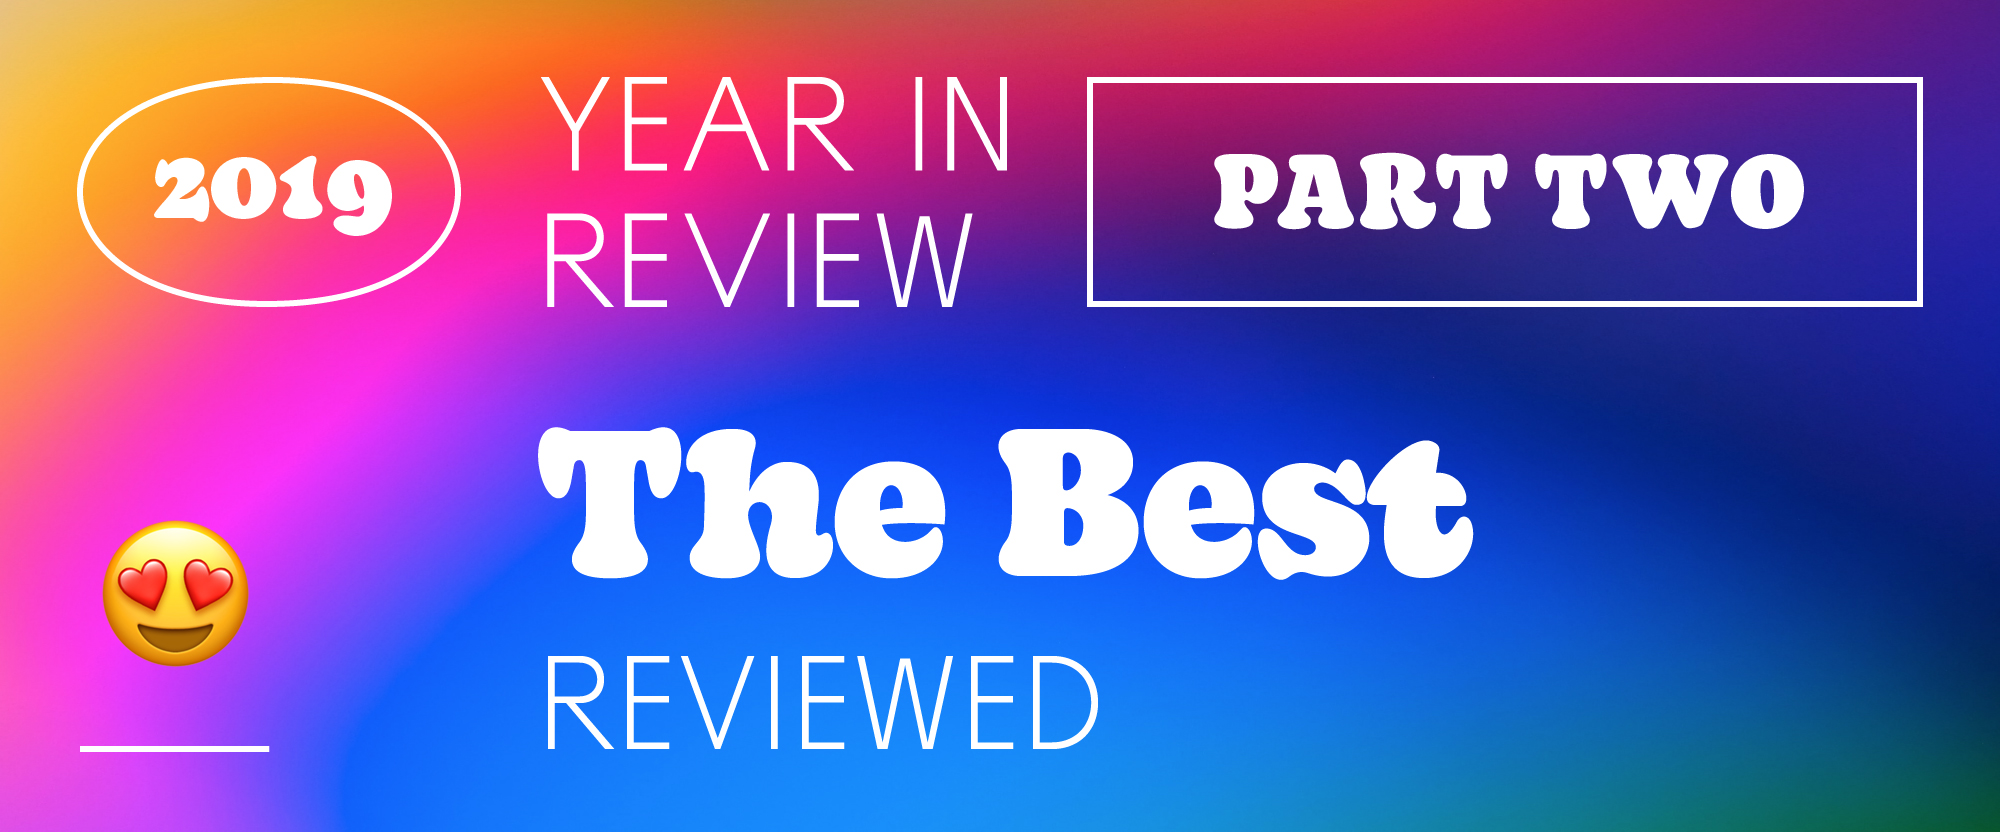 The Best and Worst Identities of 2019, Part 2: The Best Reviewed